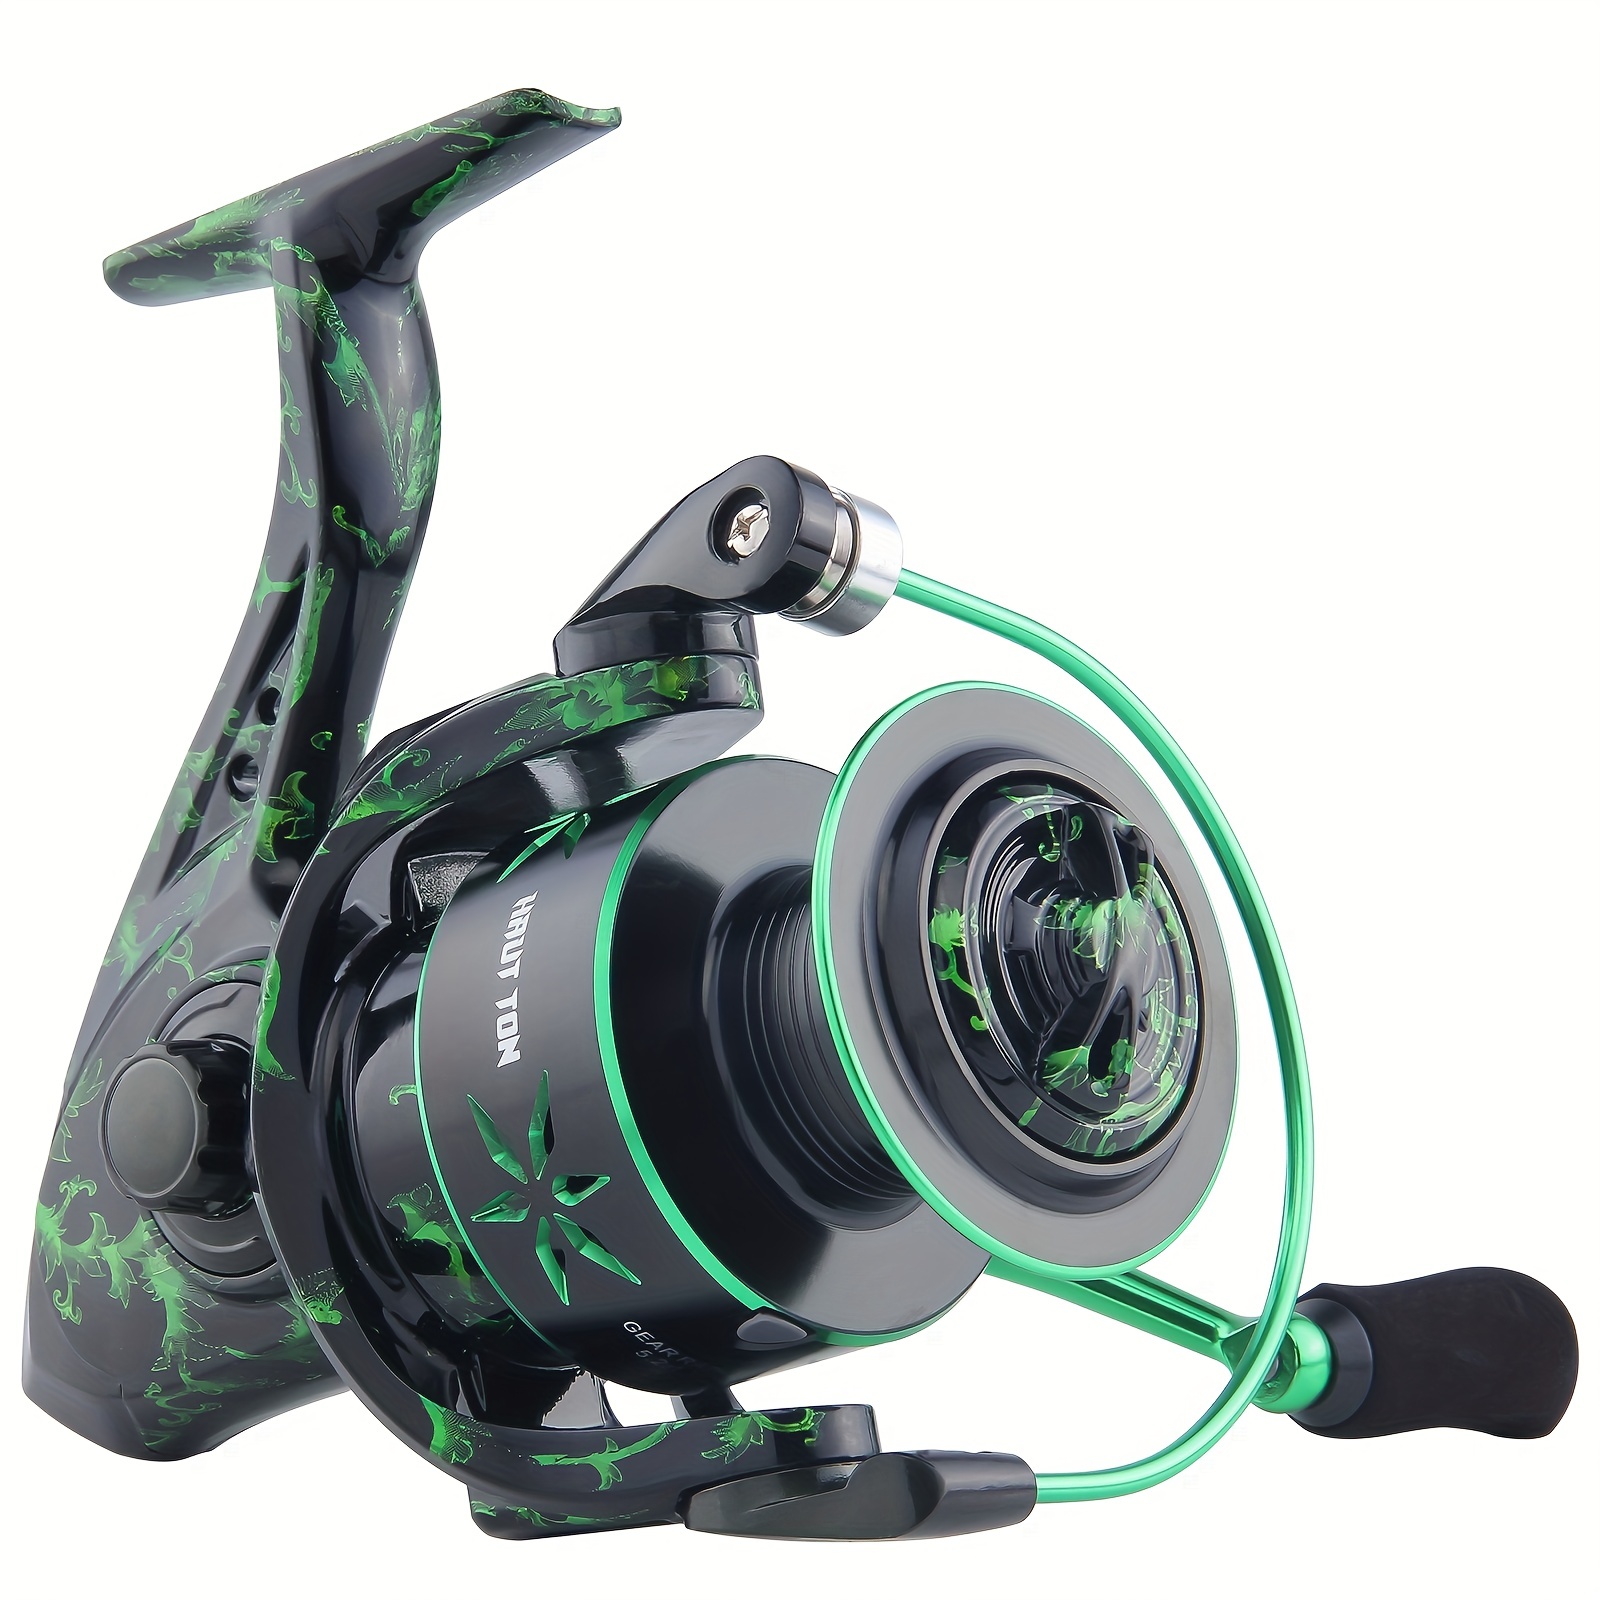 SEASIR TINGHE Spinning Reel 5+1BB 10KG/22LB Drag 5.2:1 Seawater-Proof  Aluminum Power Handle High-Quality Lightweight Fishing Coil